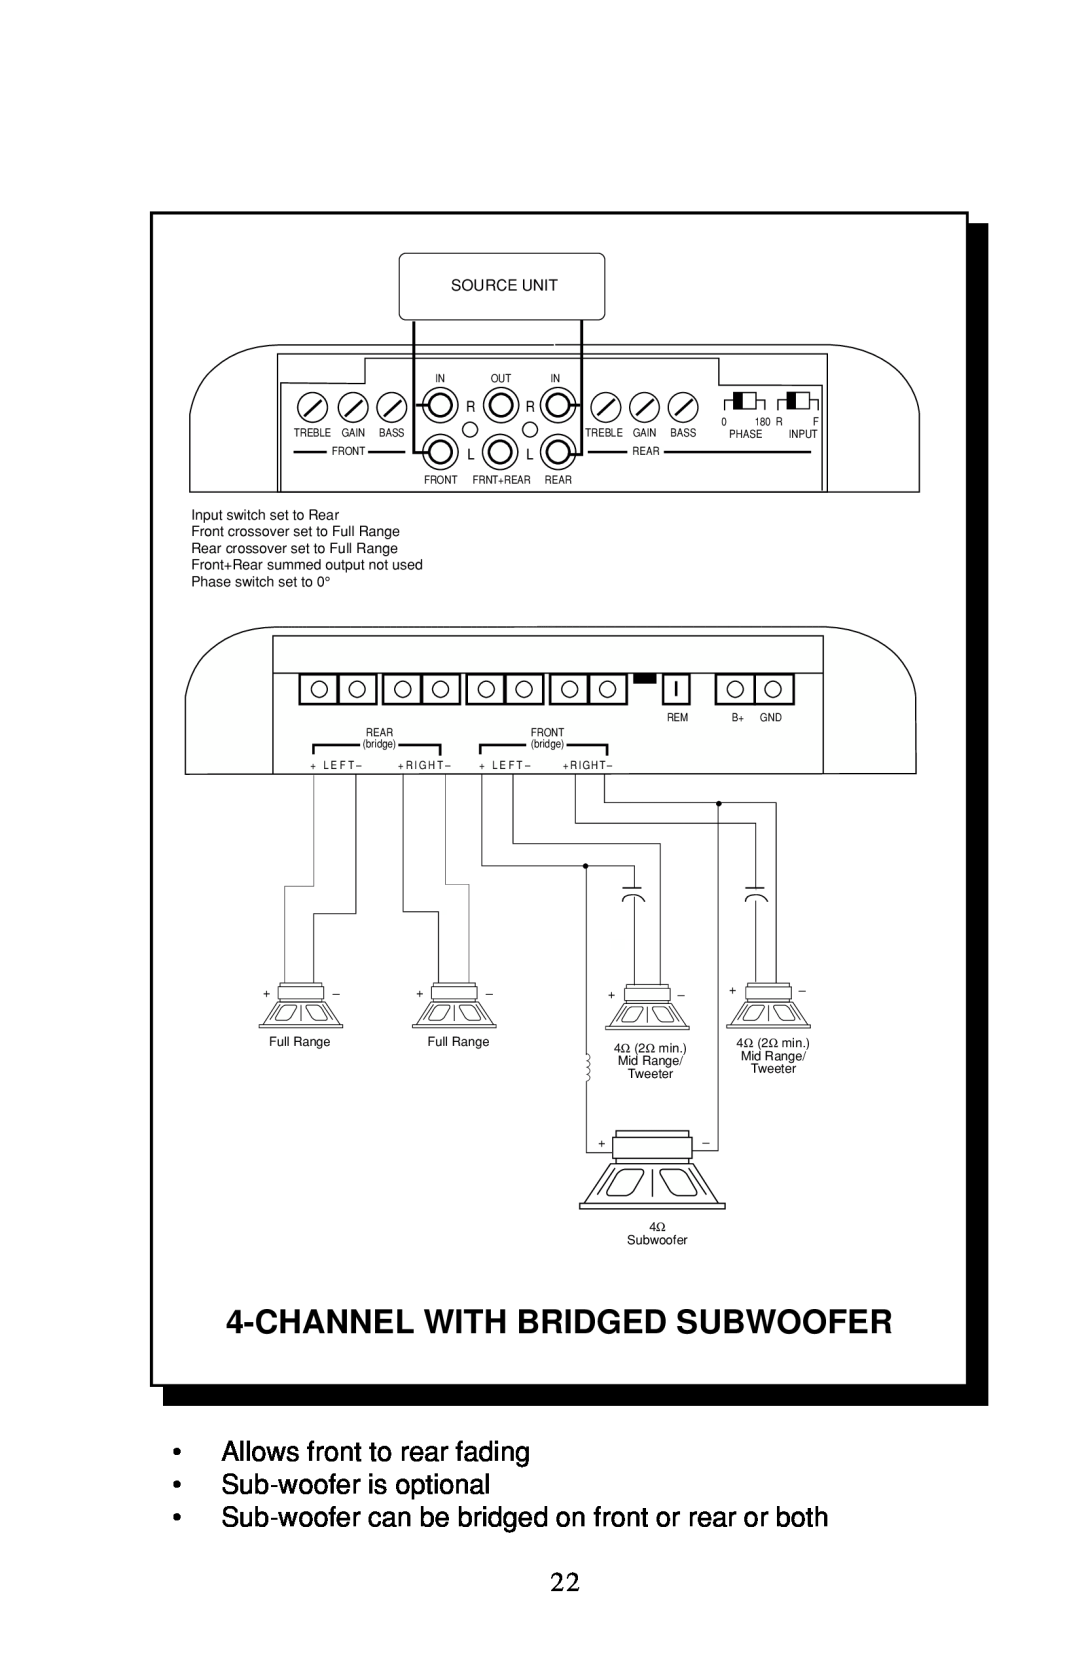 Rockford Fosgate 4-CHANNEL AMPLIFIER owner manual Channelwith Bridged Subwoofer, Source Unit, Input switch set to Rear 